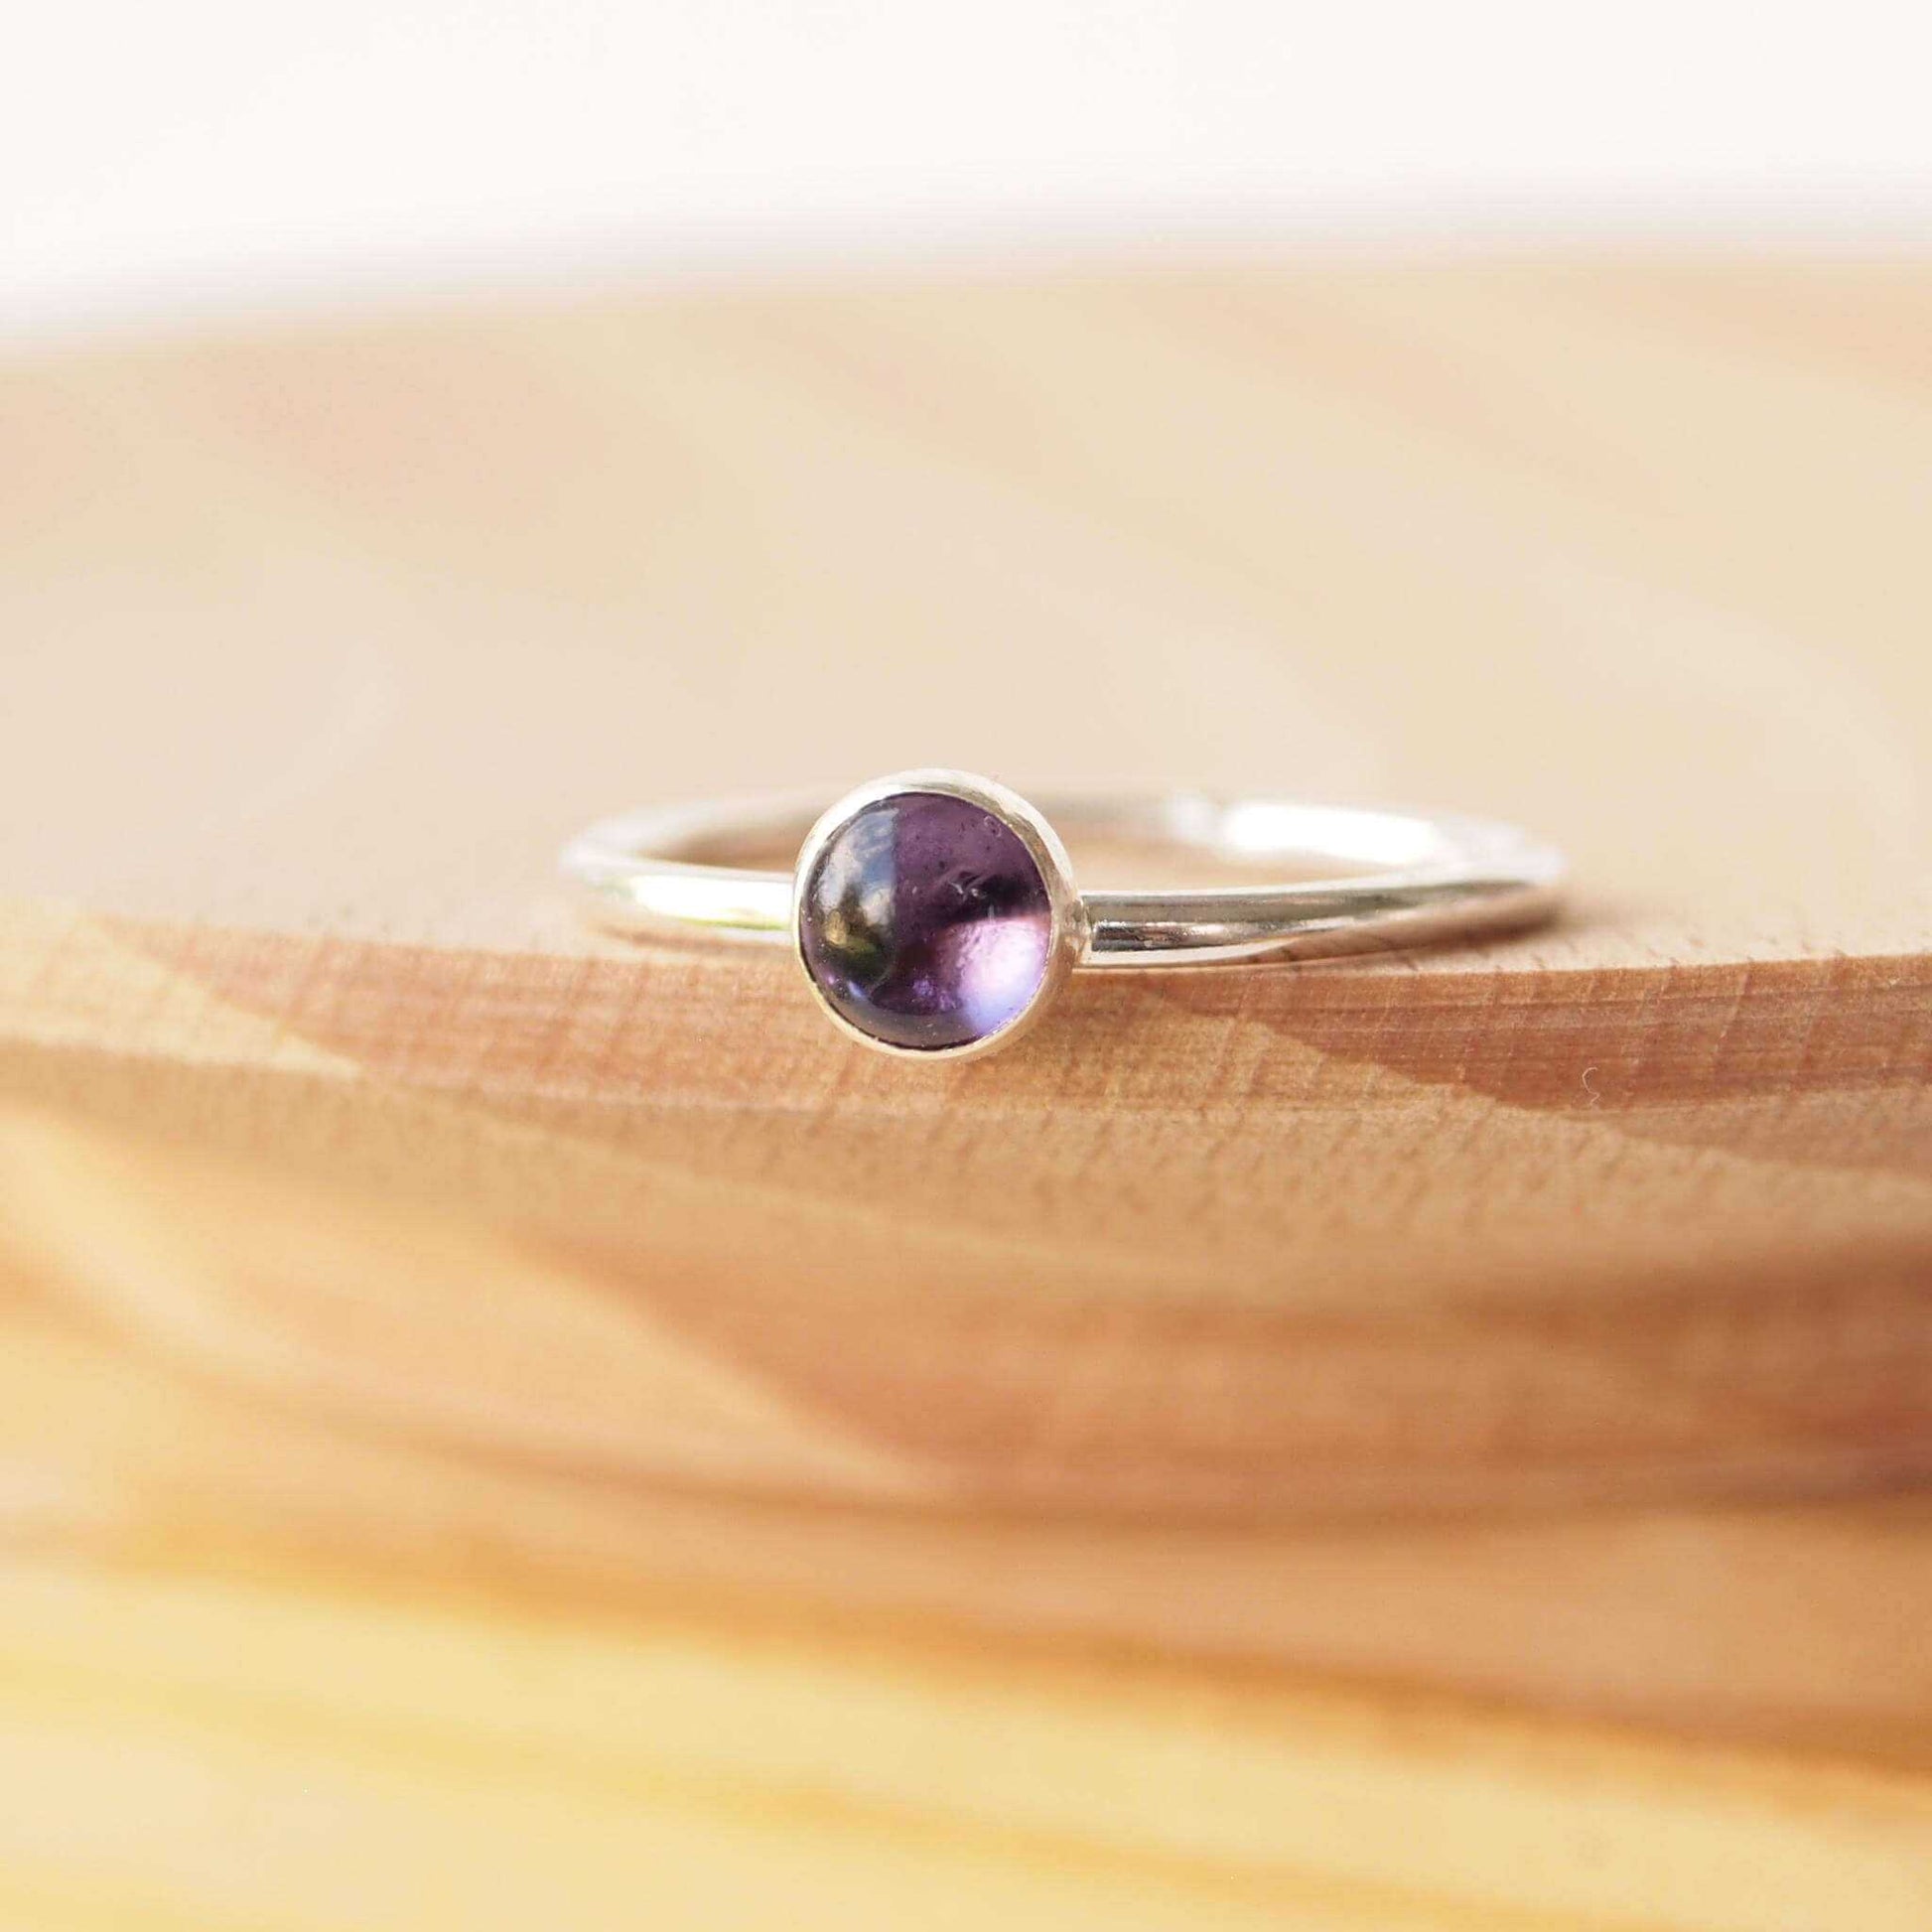 Single solitaire sterling silver ring with a round 5mm purple Amethyst. The ring is made in a modern simple style with a 5mm round cabochon set onto a modern halo fully round band. Made to order to your ring size, and handmade in Scotland by maram jewellery